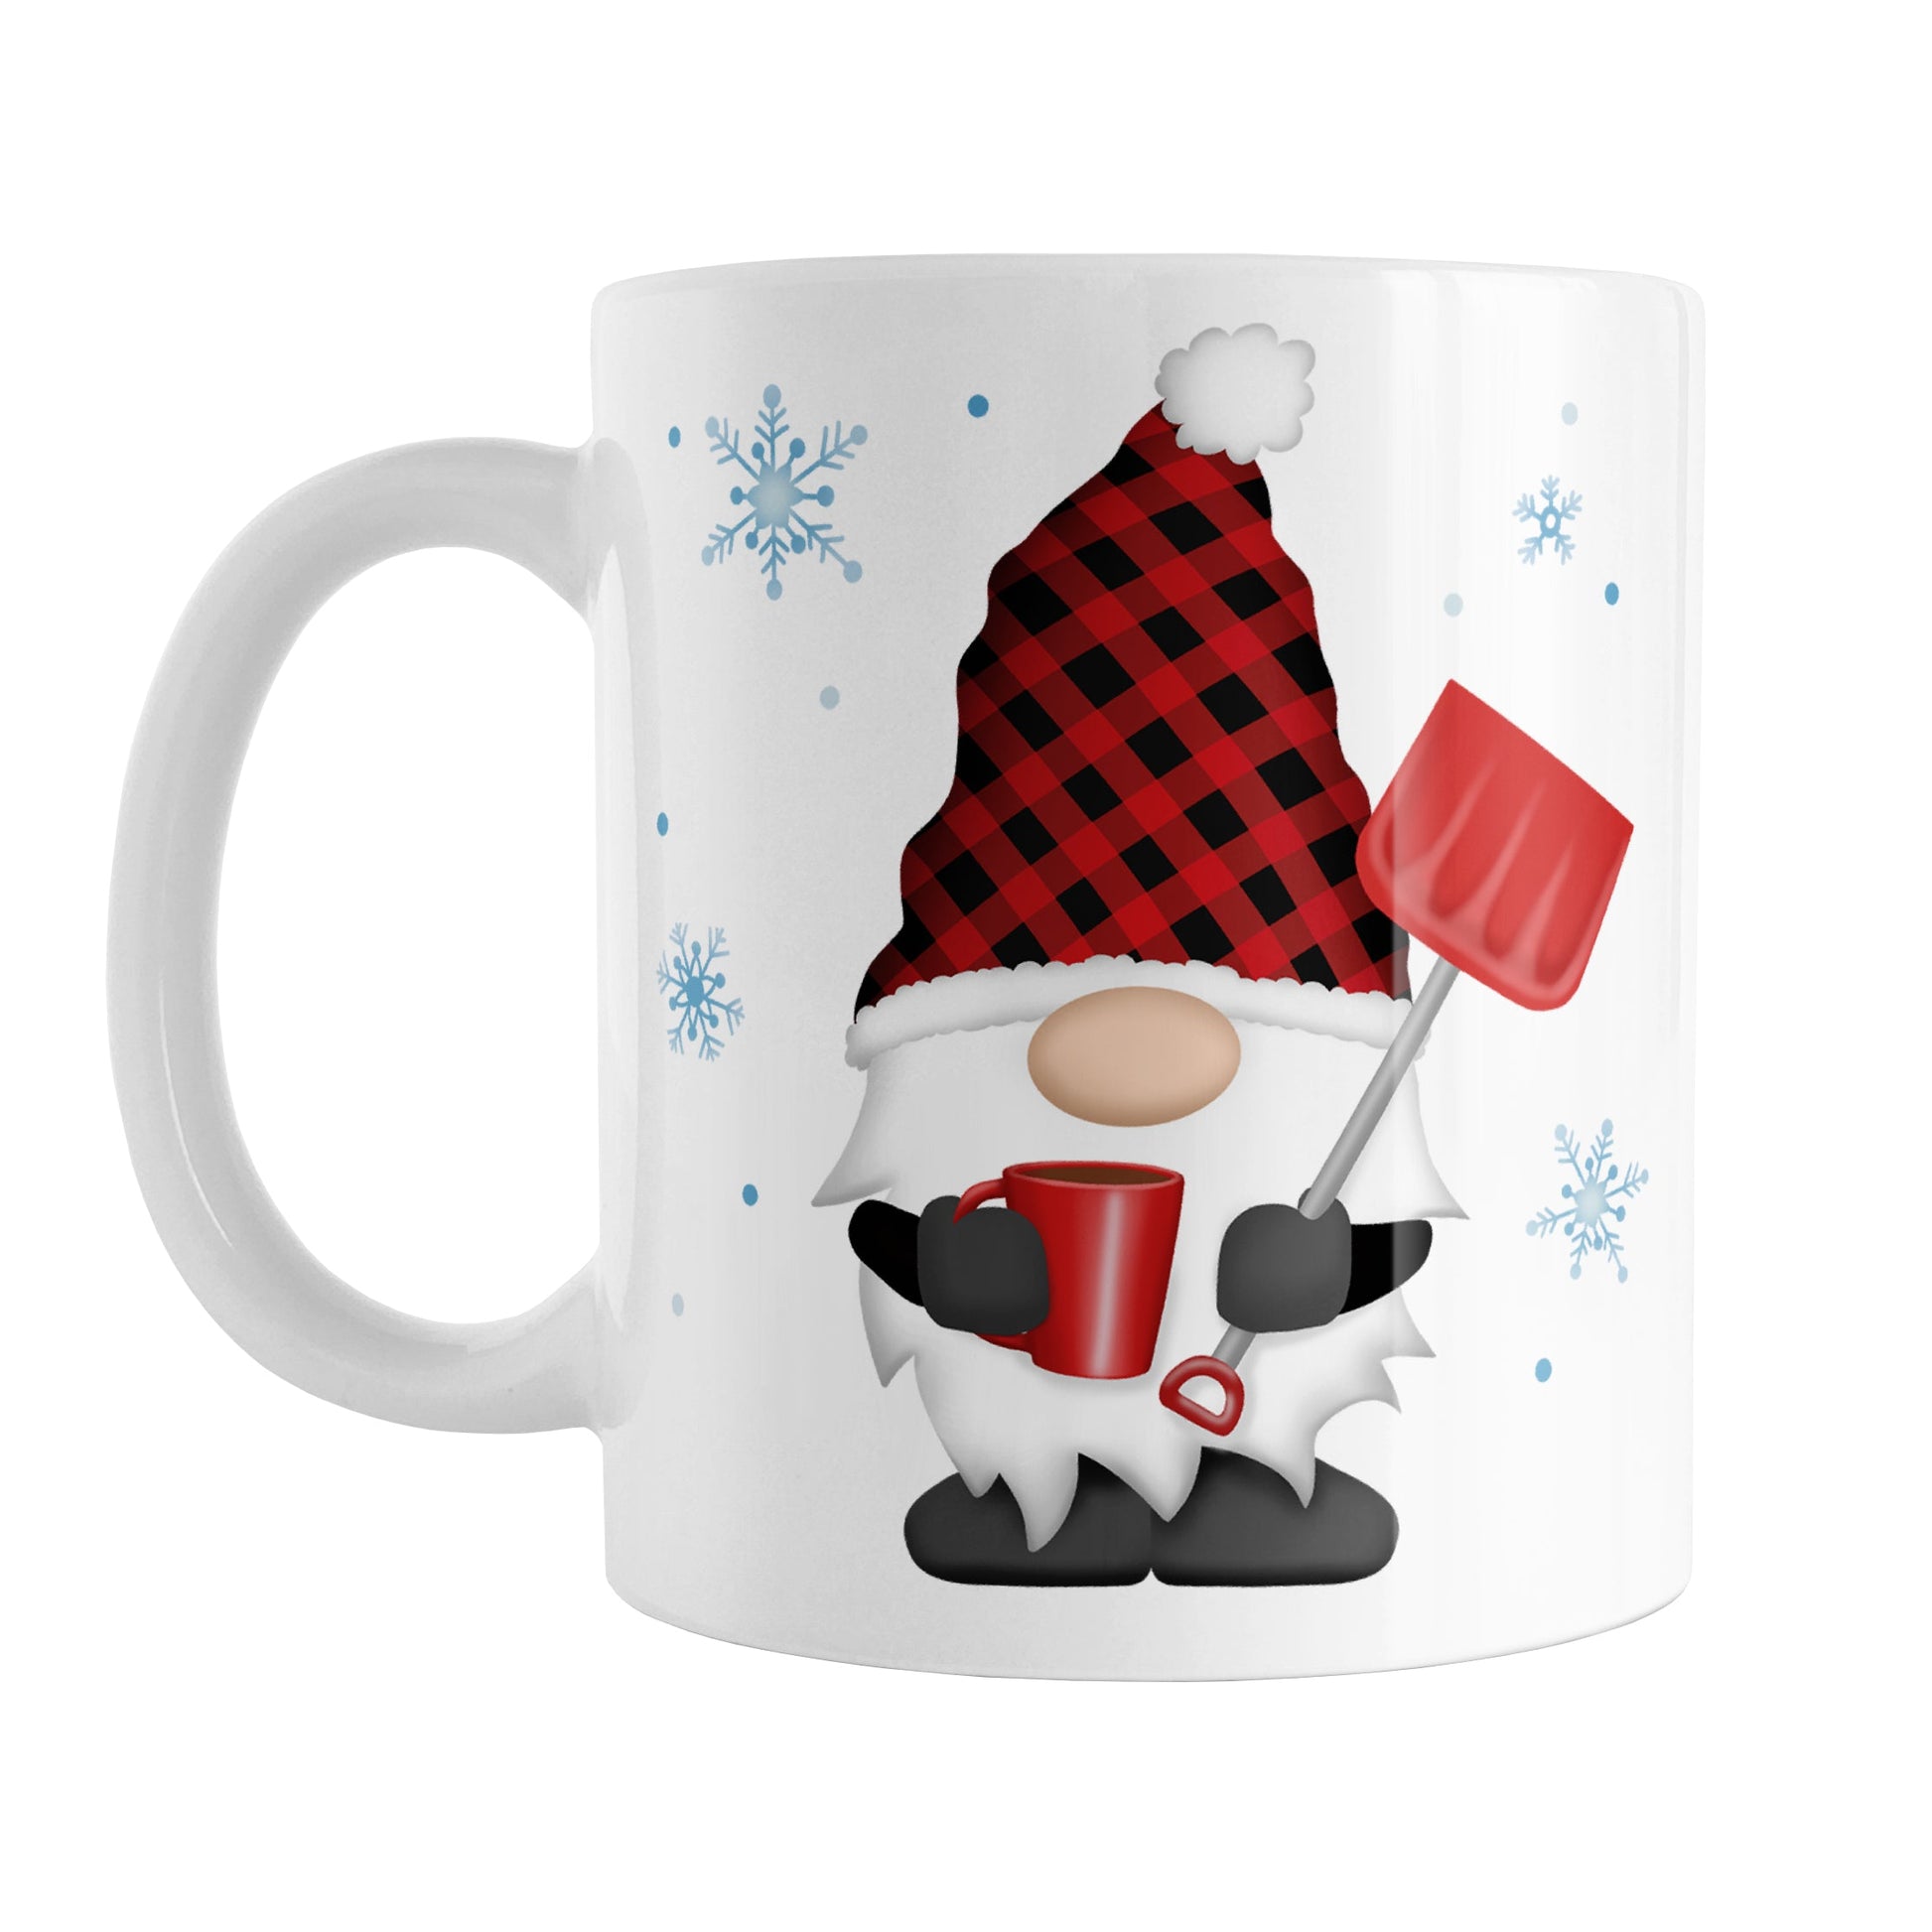 Red Buffalo Plaid Gnome Mug (11oz) at Amy's Coffee Mugs. A ceramic coffee mug designed with a gnome with a red and black buffalo plaid pattern hat and holding a hot beverage and snow shovel with snowflakes around it. This cute buffalo plaid gnome illustration is on both sides of the mug. 